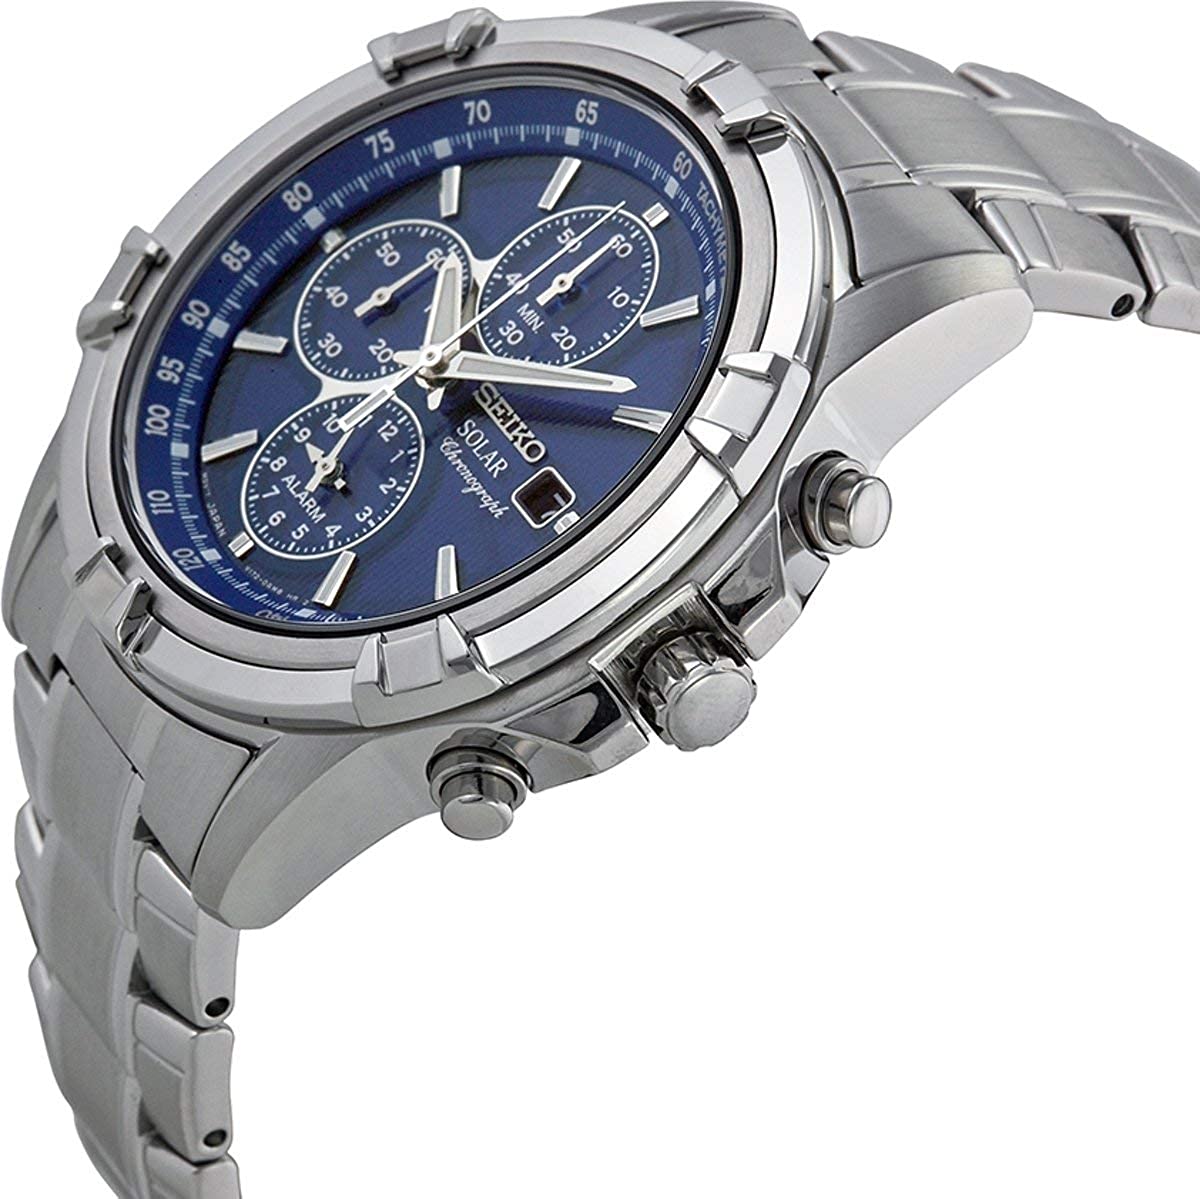 Seiko Men's Chronograph Solar Powered Watch with Stainless Steel Strap SSC141P1